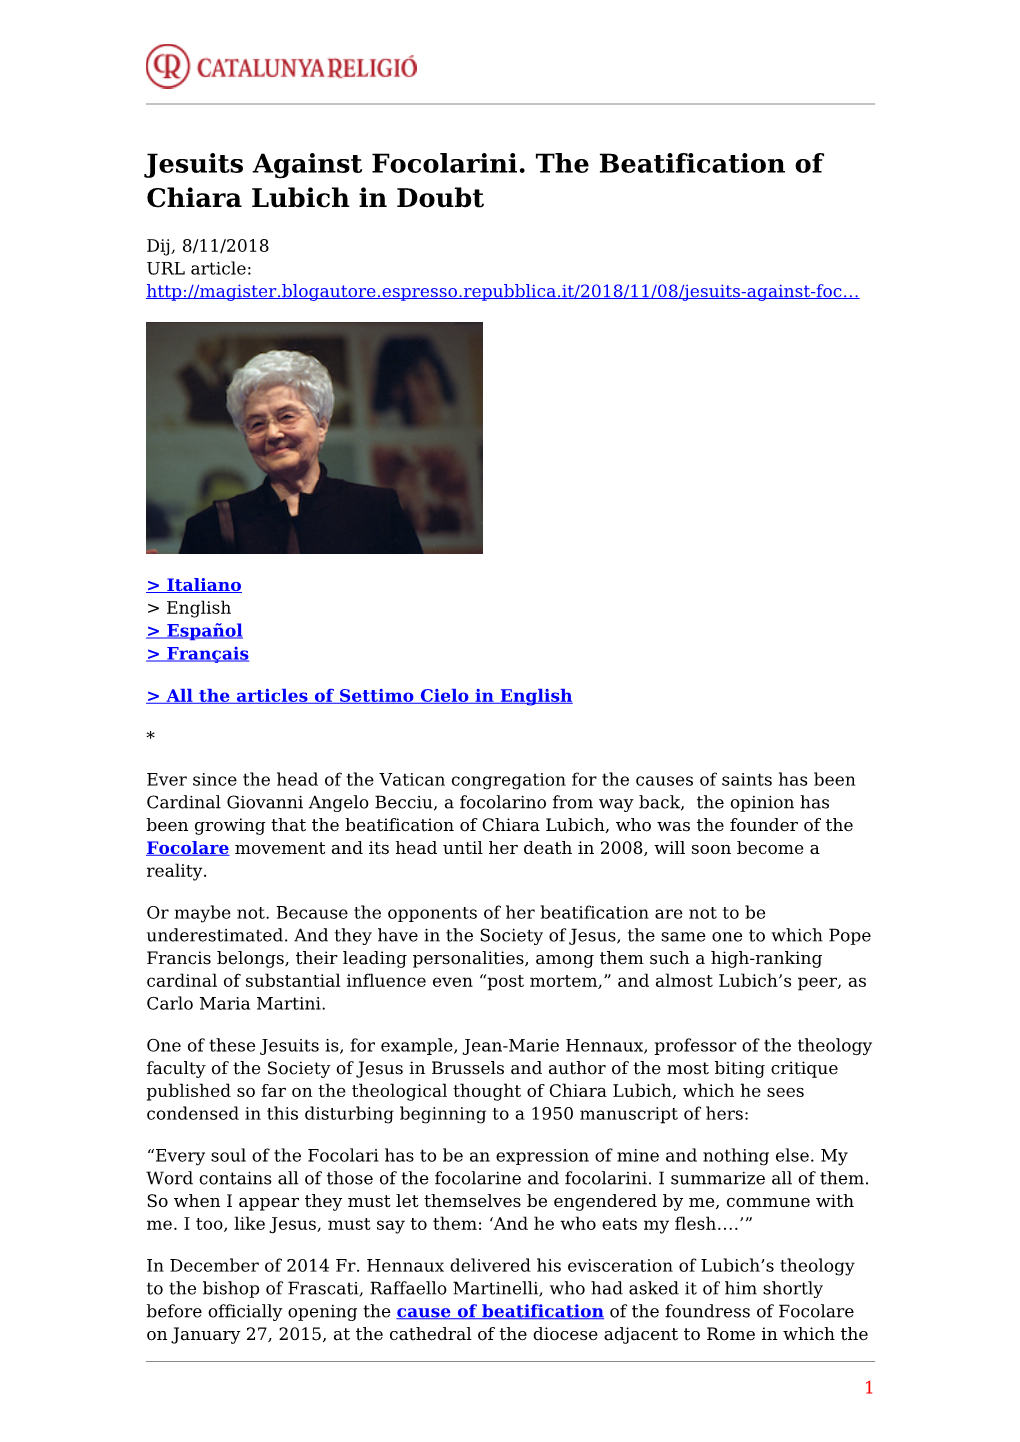 Jesuits Against Focolarini. the Beatification of Chiara Lubich in Doubt